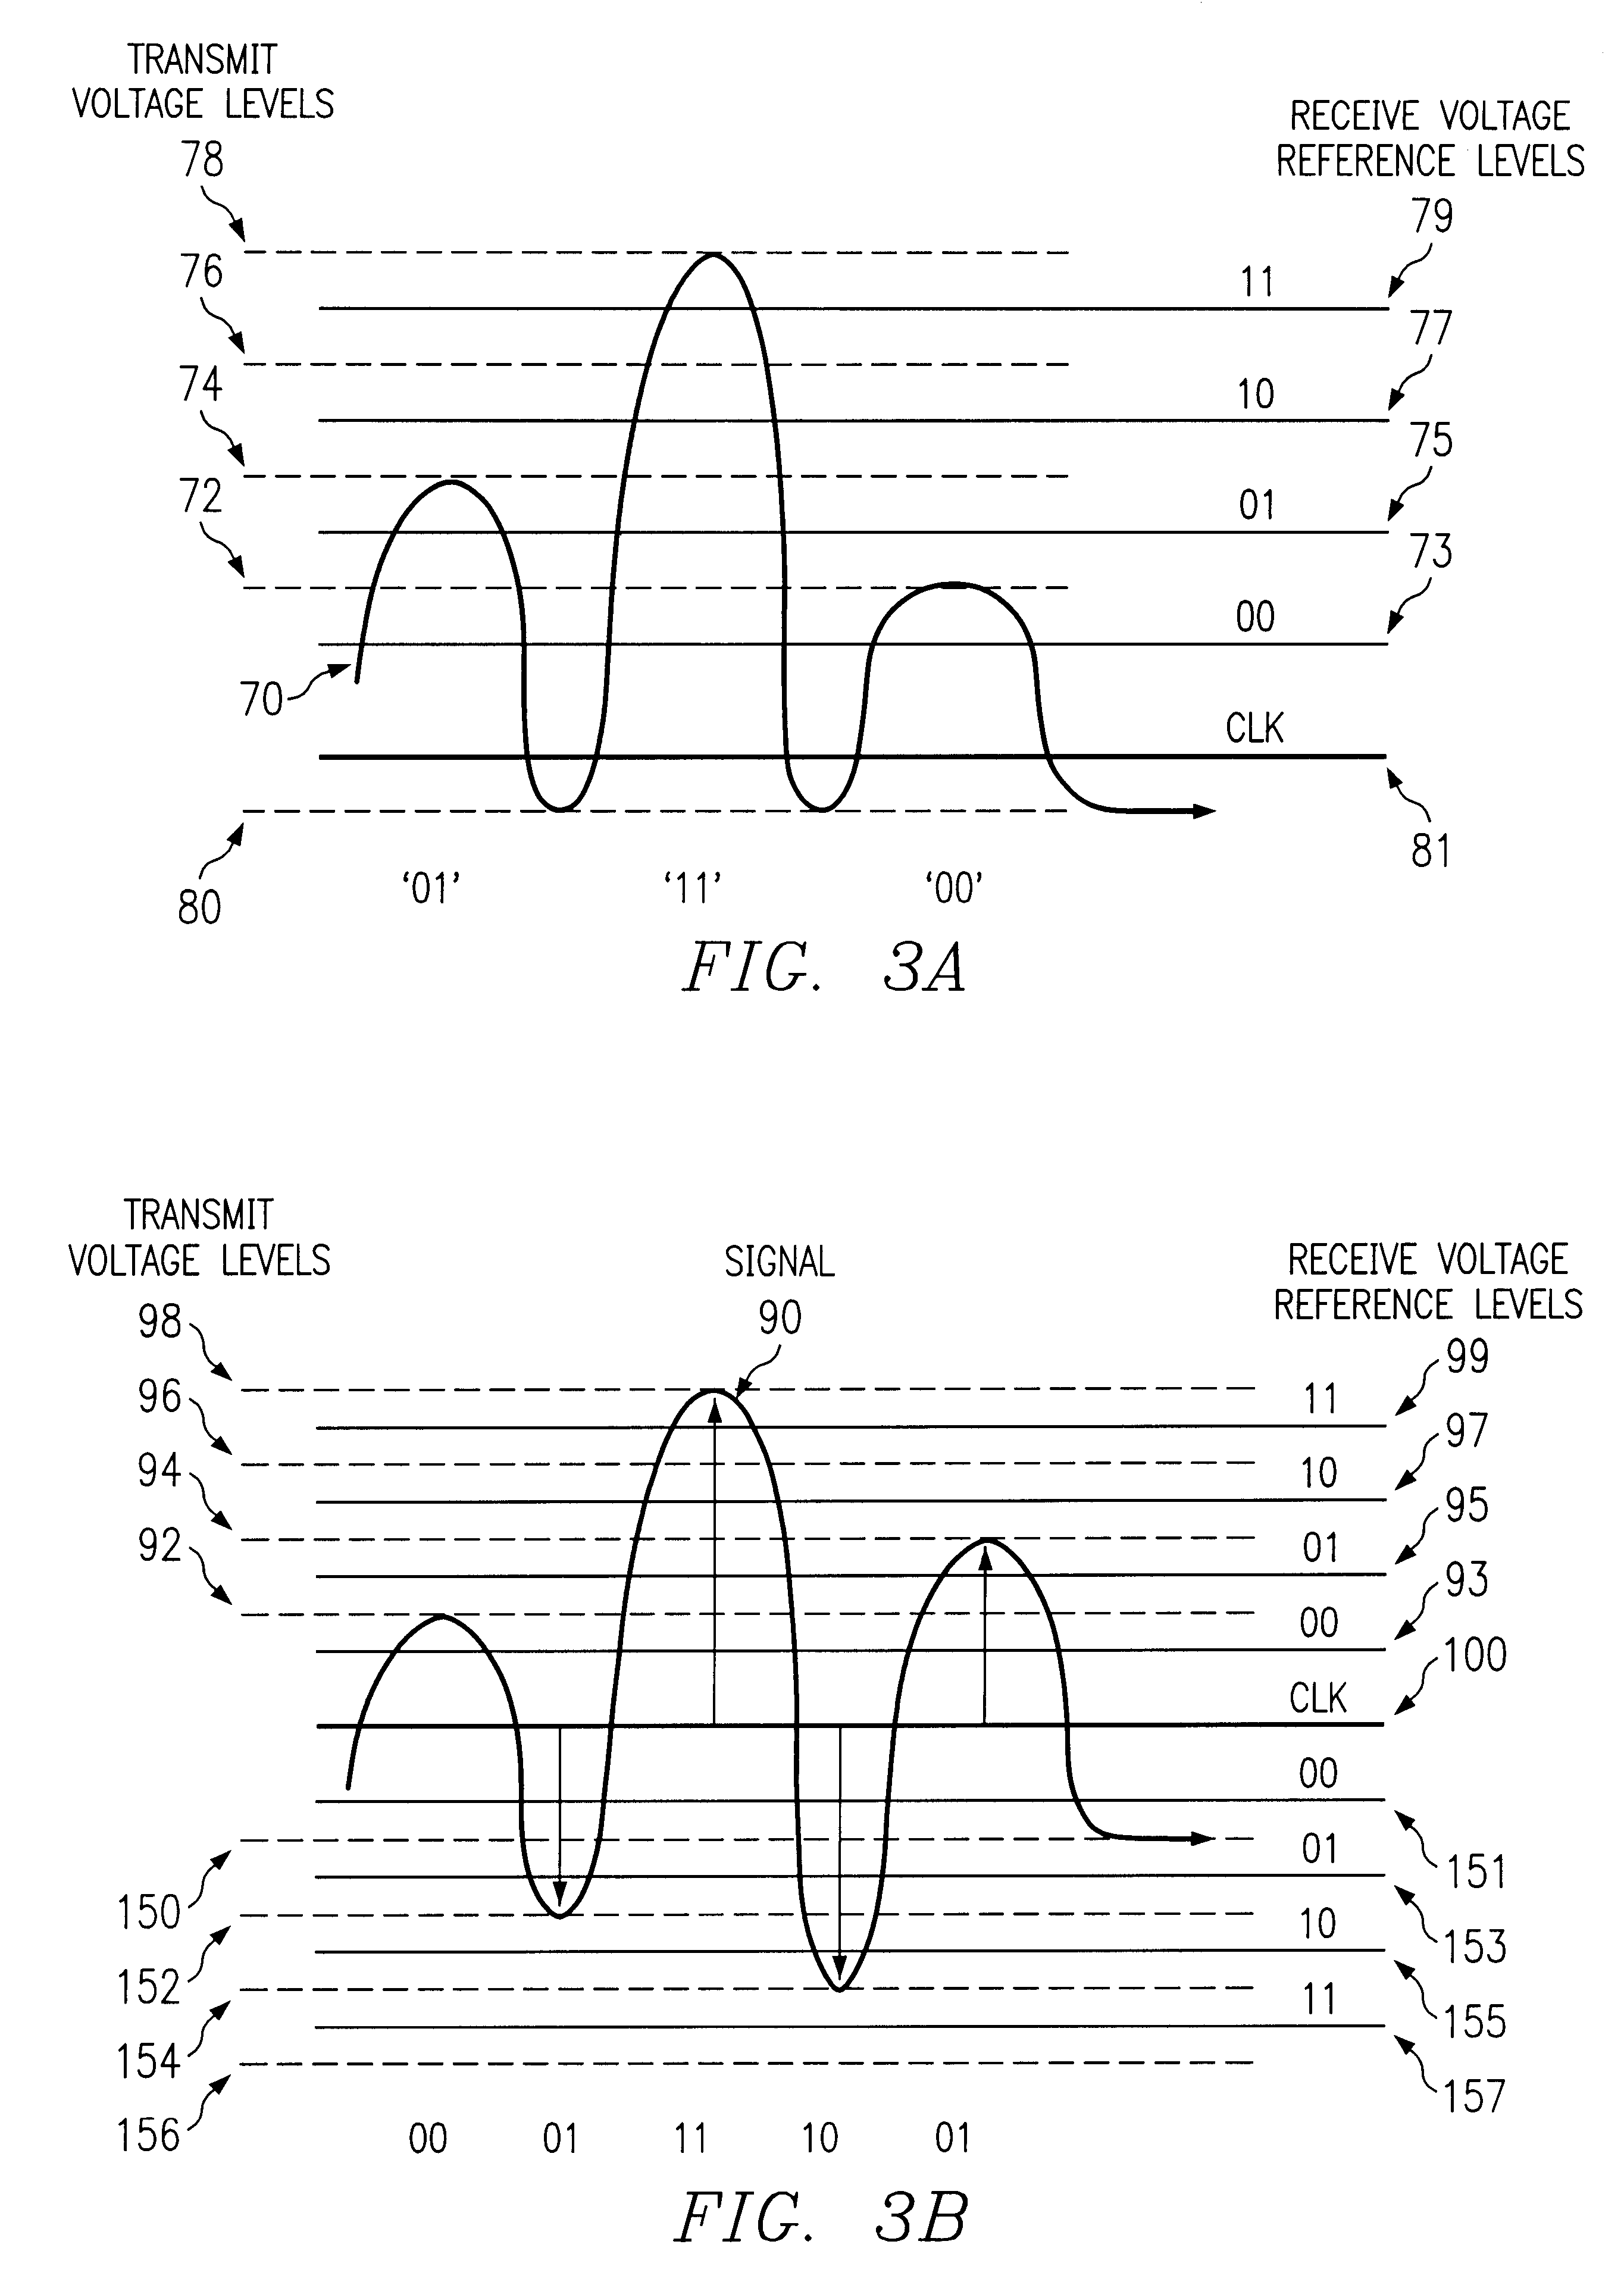 Method and apparatus for utilizing a data processing system for multi-level data communications providing self-clocking